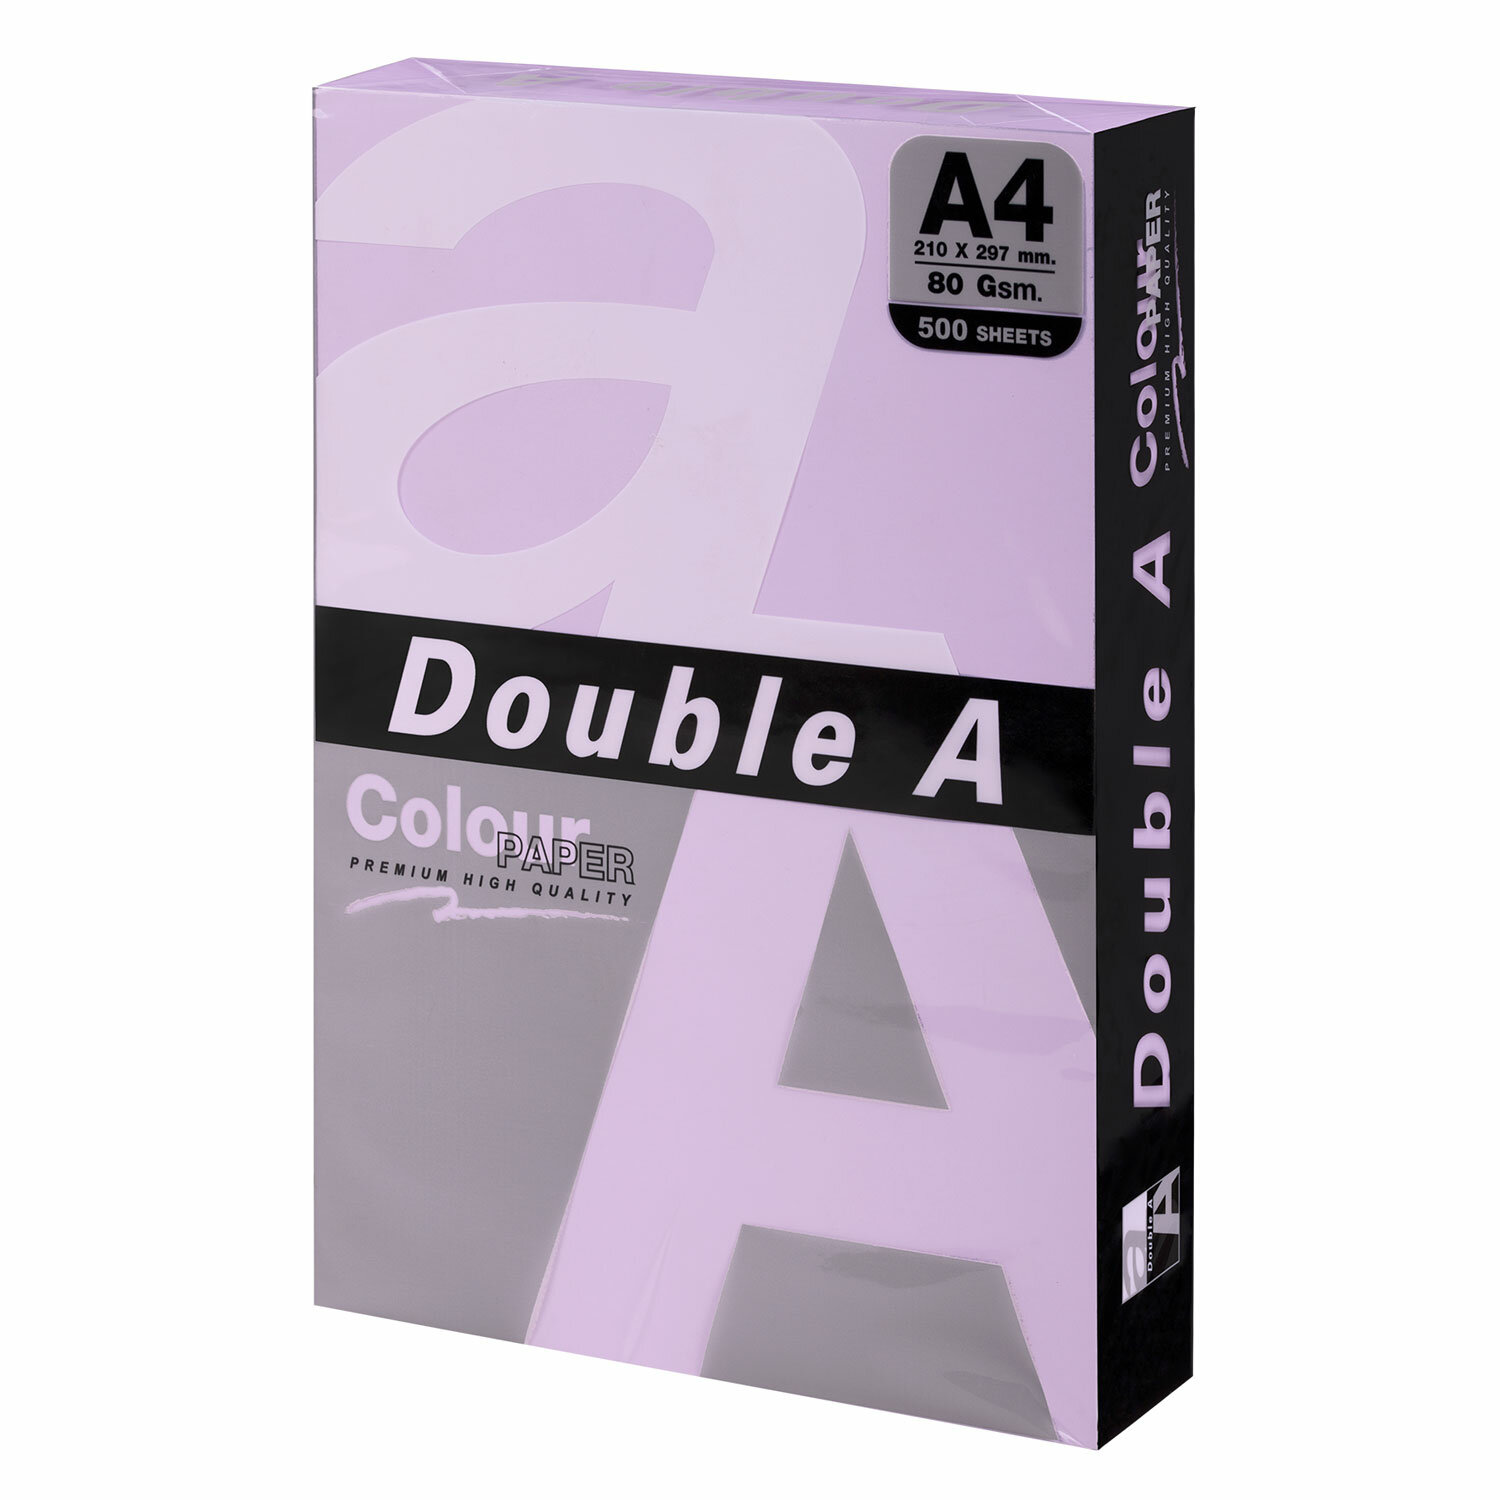  DOUBLE A 115116